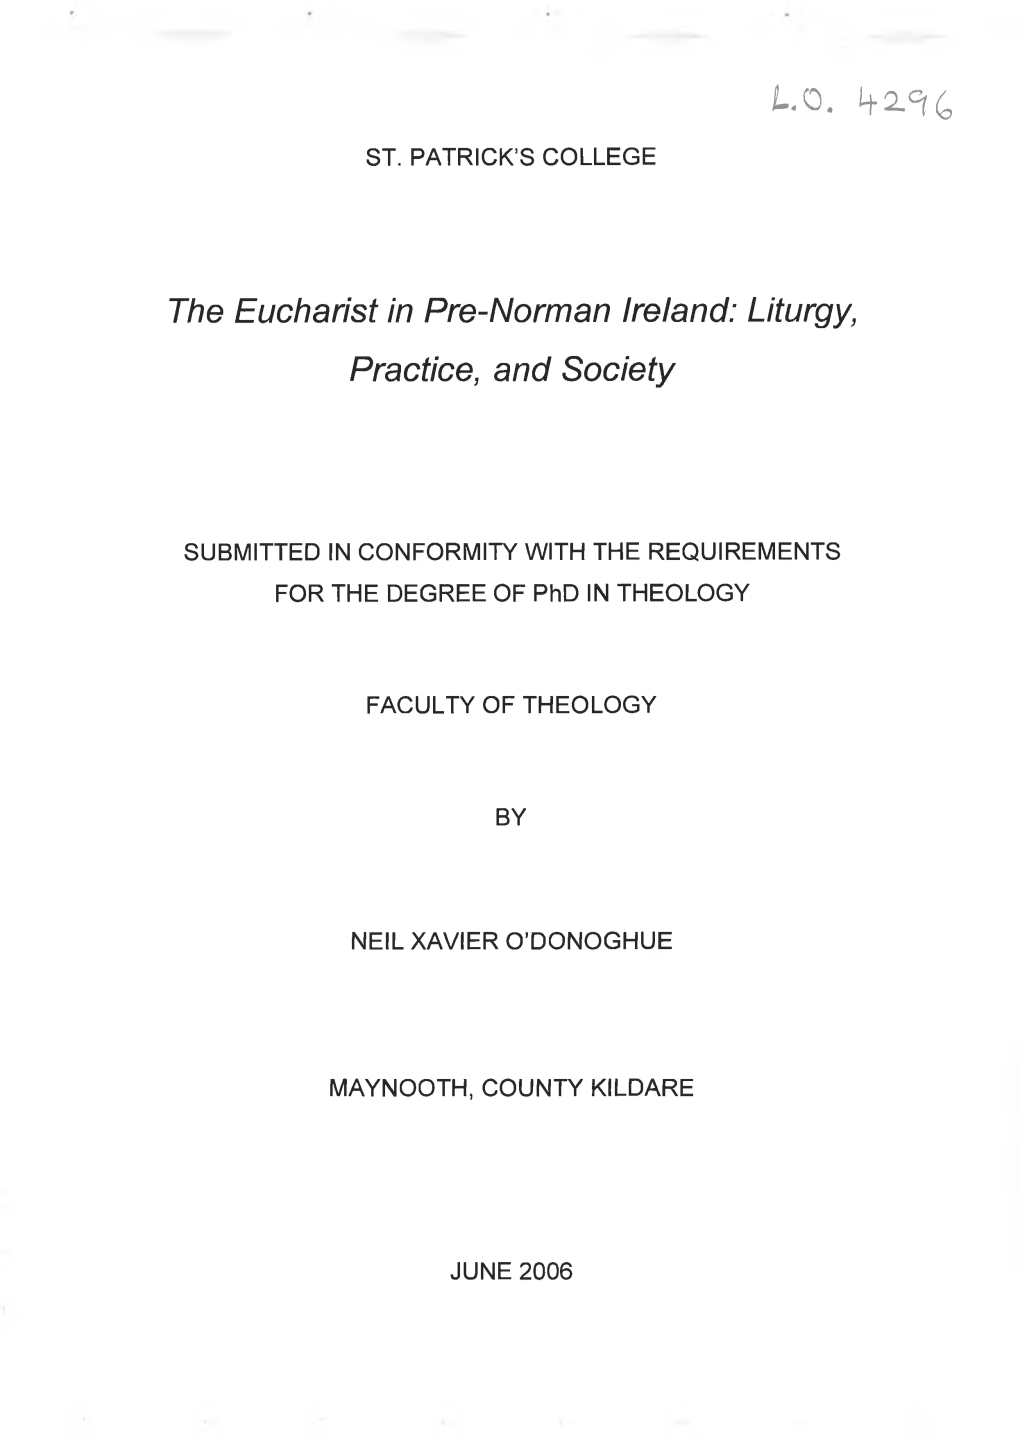 The Eucharist in Pre-Norman Ireland: Liturgy, Practice, and Society